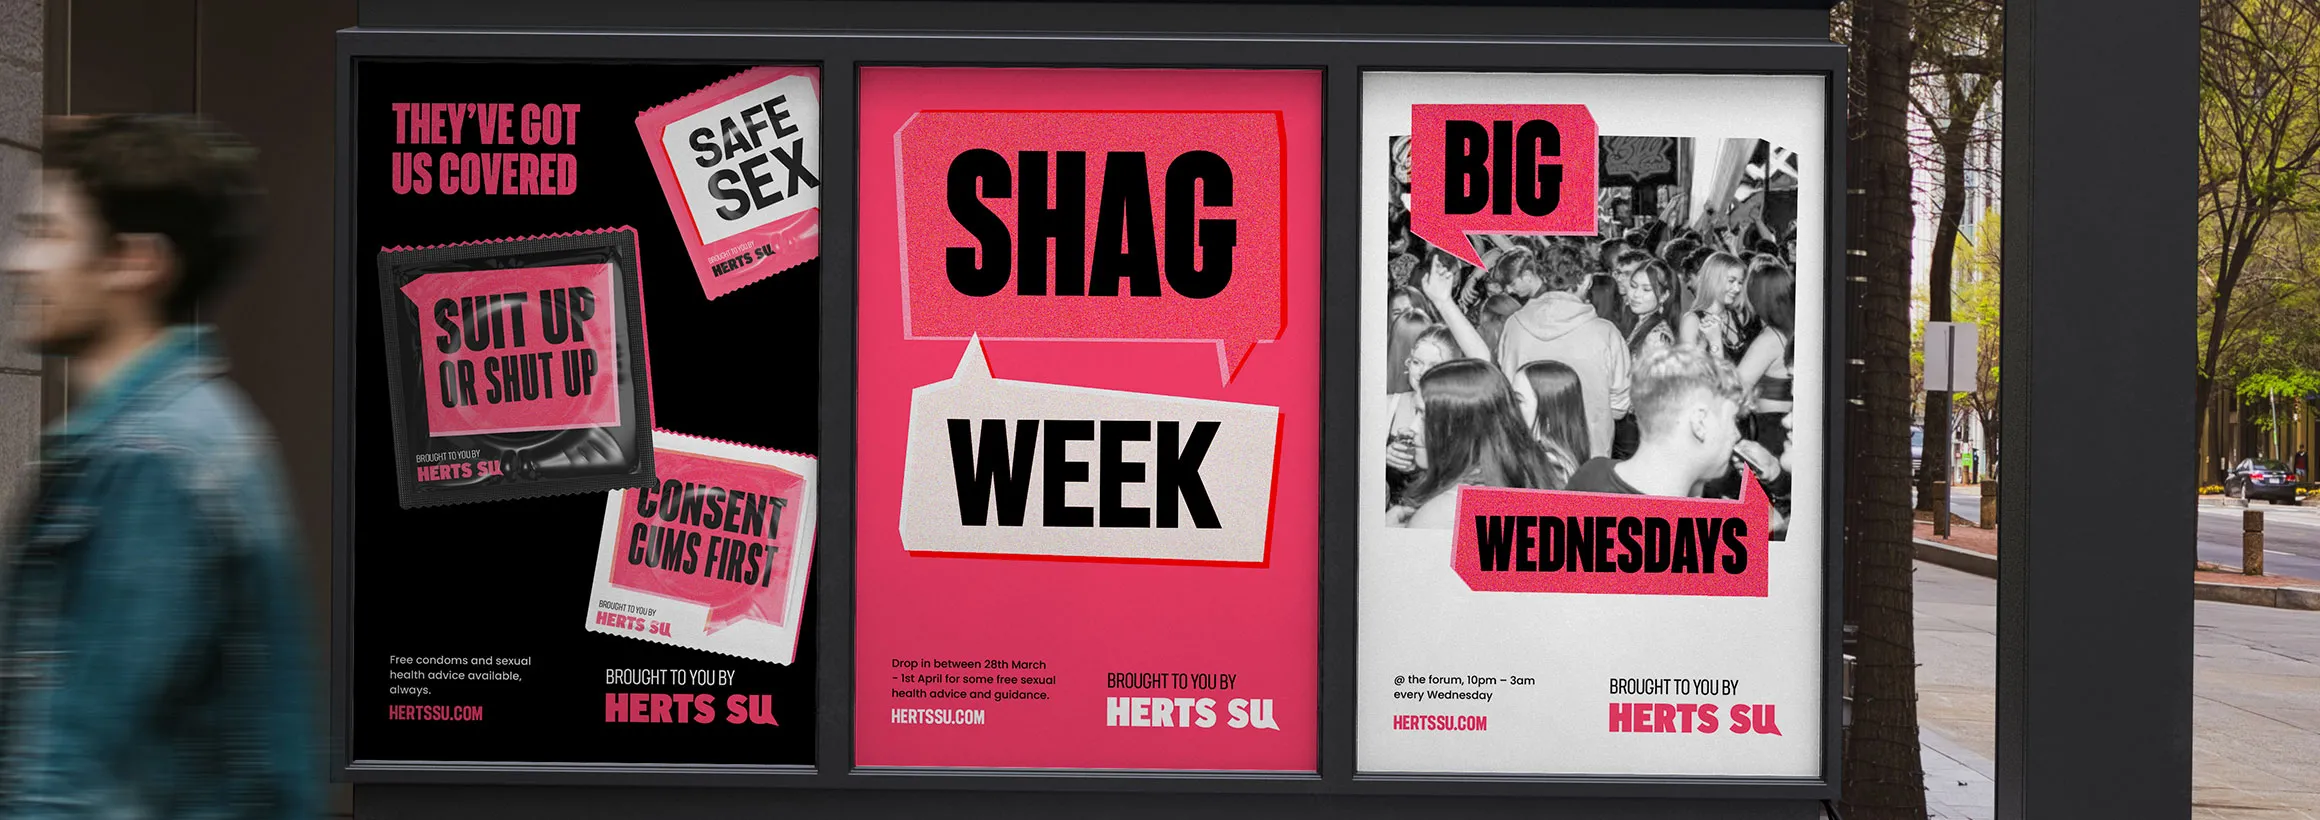 Herts SU event promotion posters